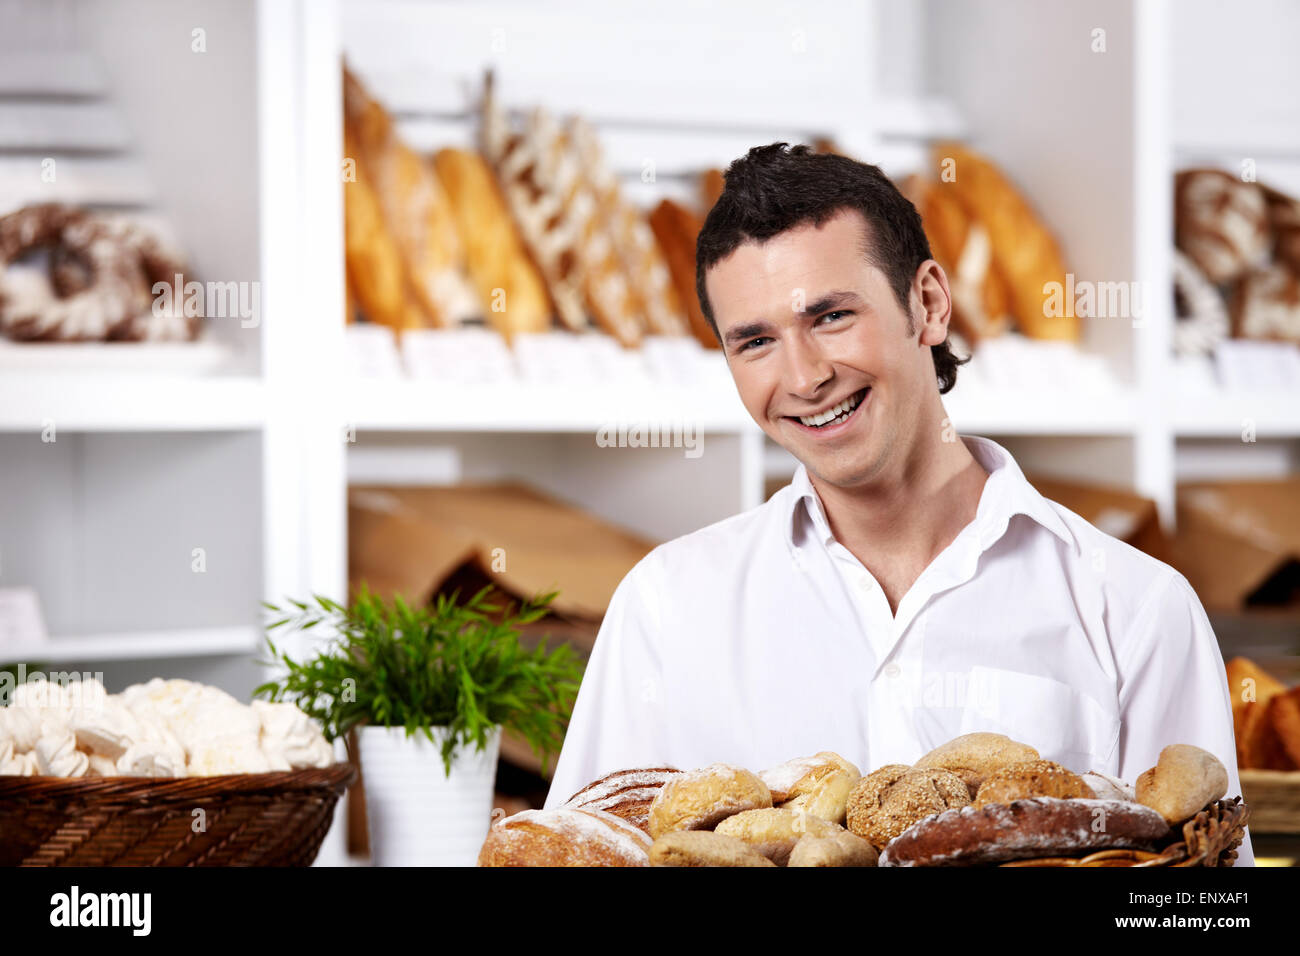 The young seller with a basket of rolls close up Stock Photo